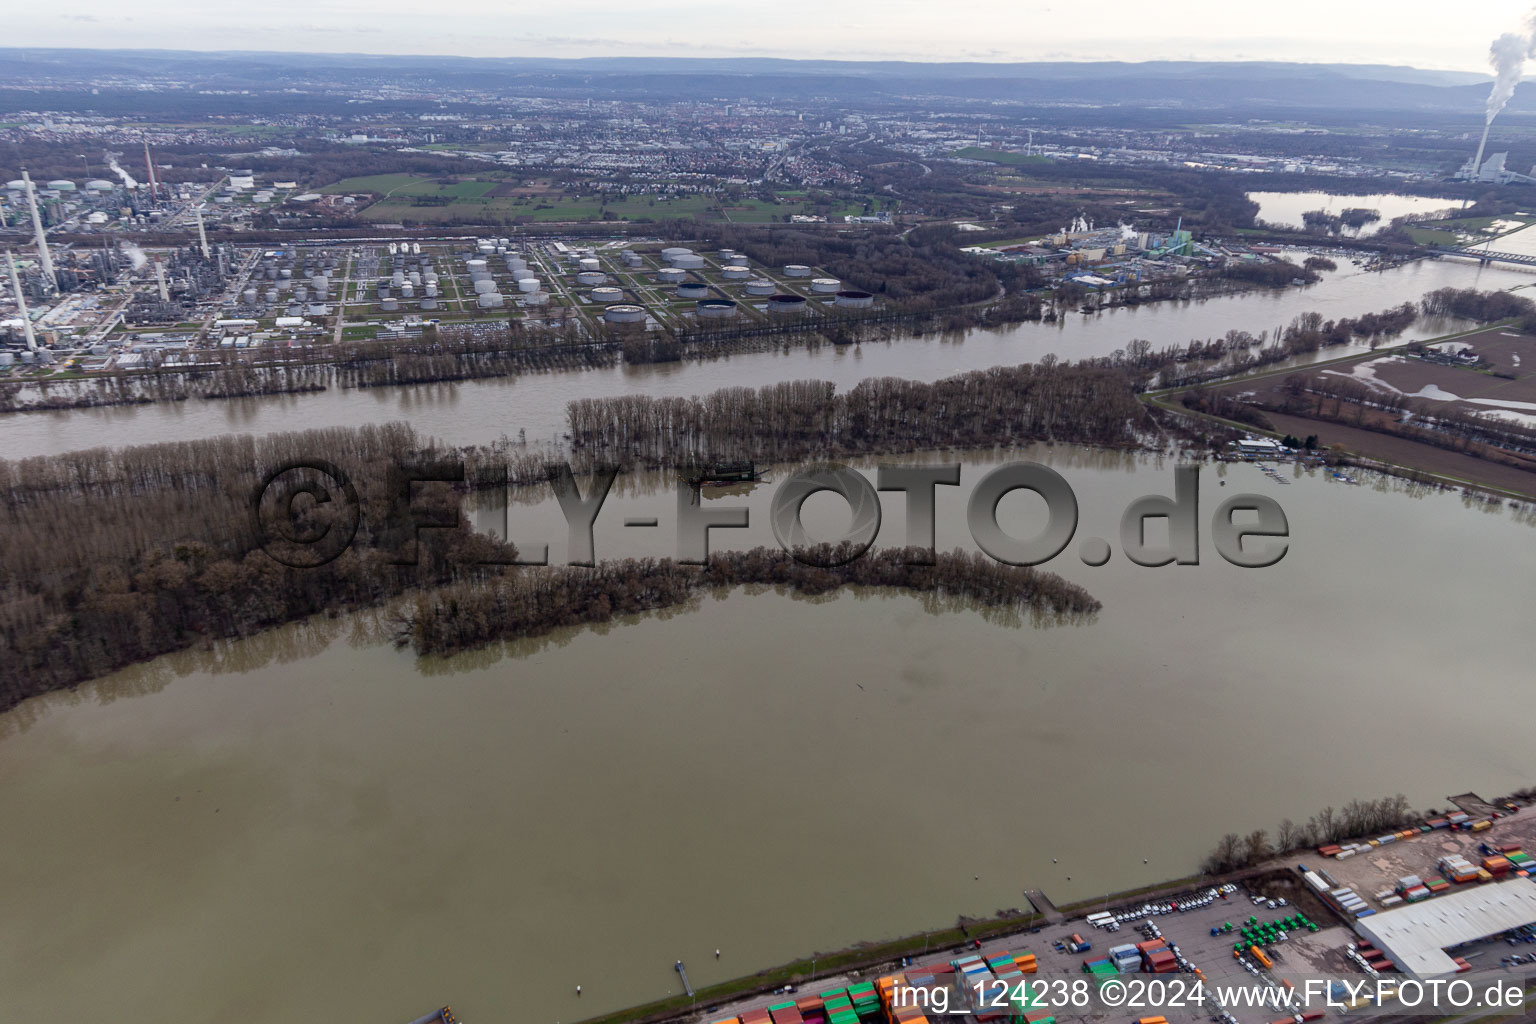 Aerial view of Dredger ship in the Wörth state harbor at high water in the district Maximiliansau in Wörth am Rhein in the state Rhineland-Palatinate, Germany